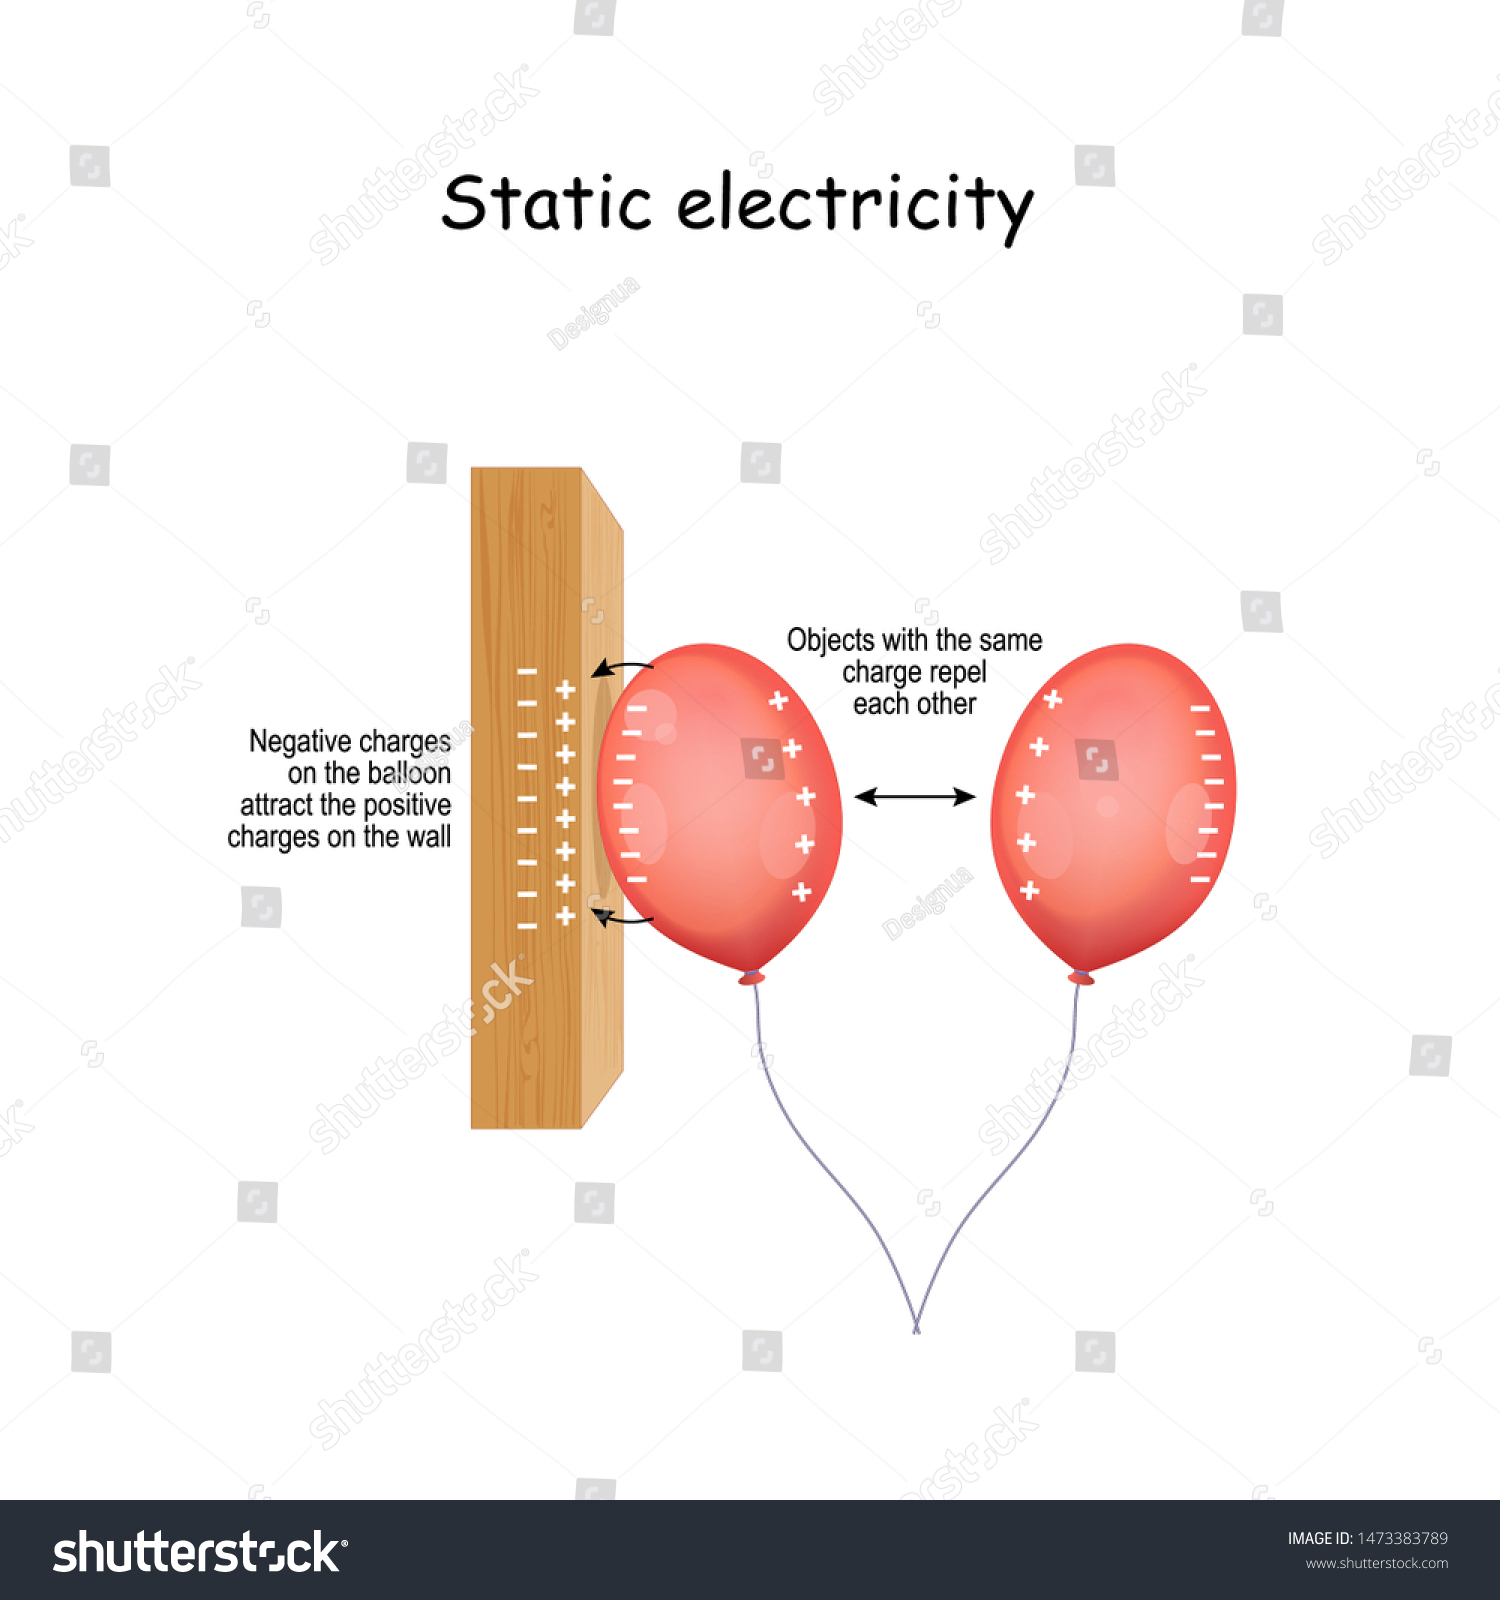 Real life static electricity examples Image